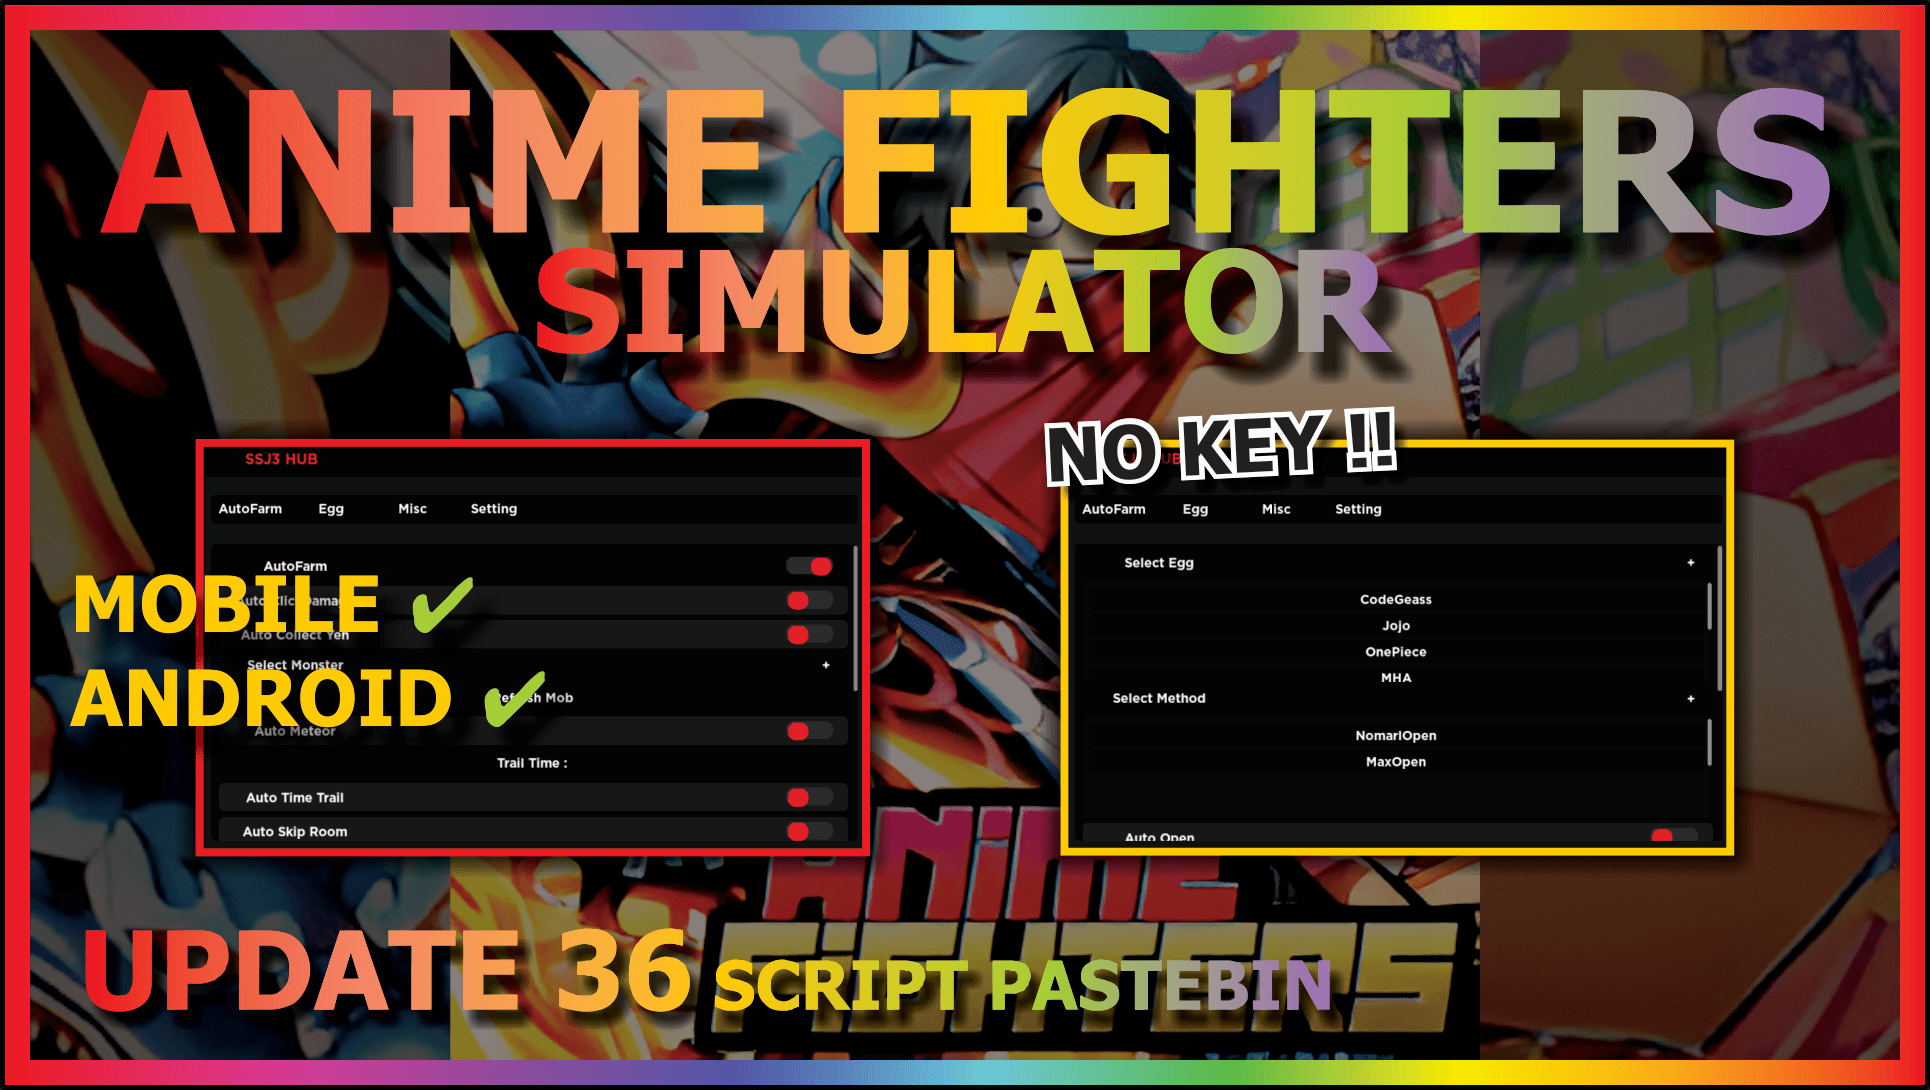 You are currently viewing ANIME FIGHTERS SIMULATOR 🏖️